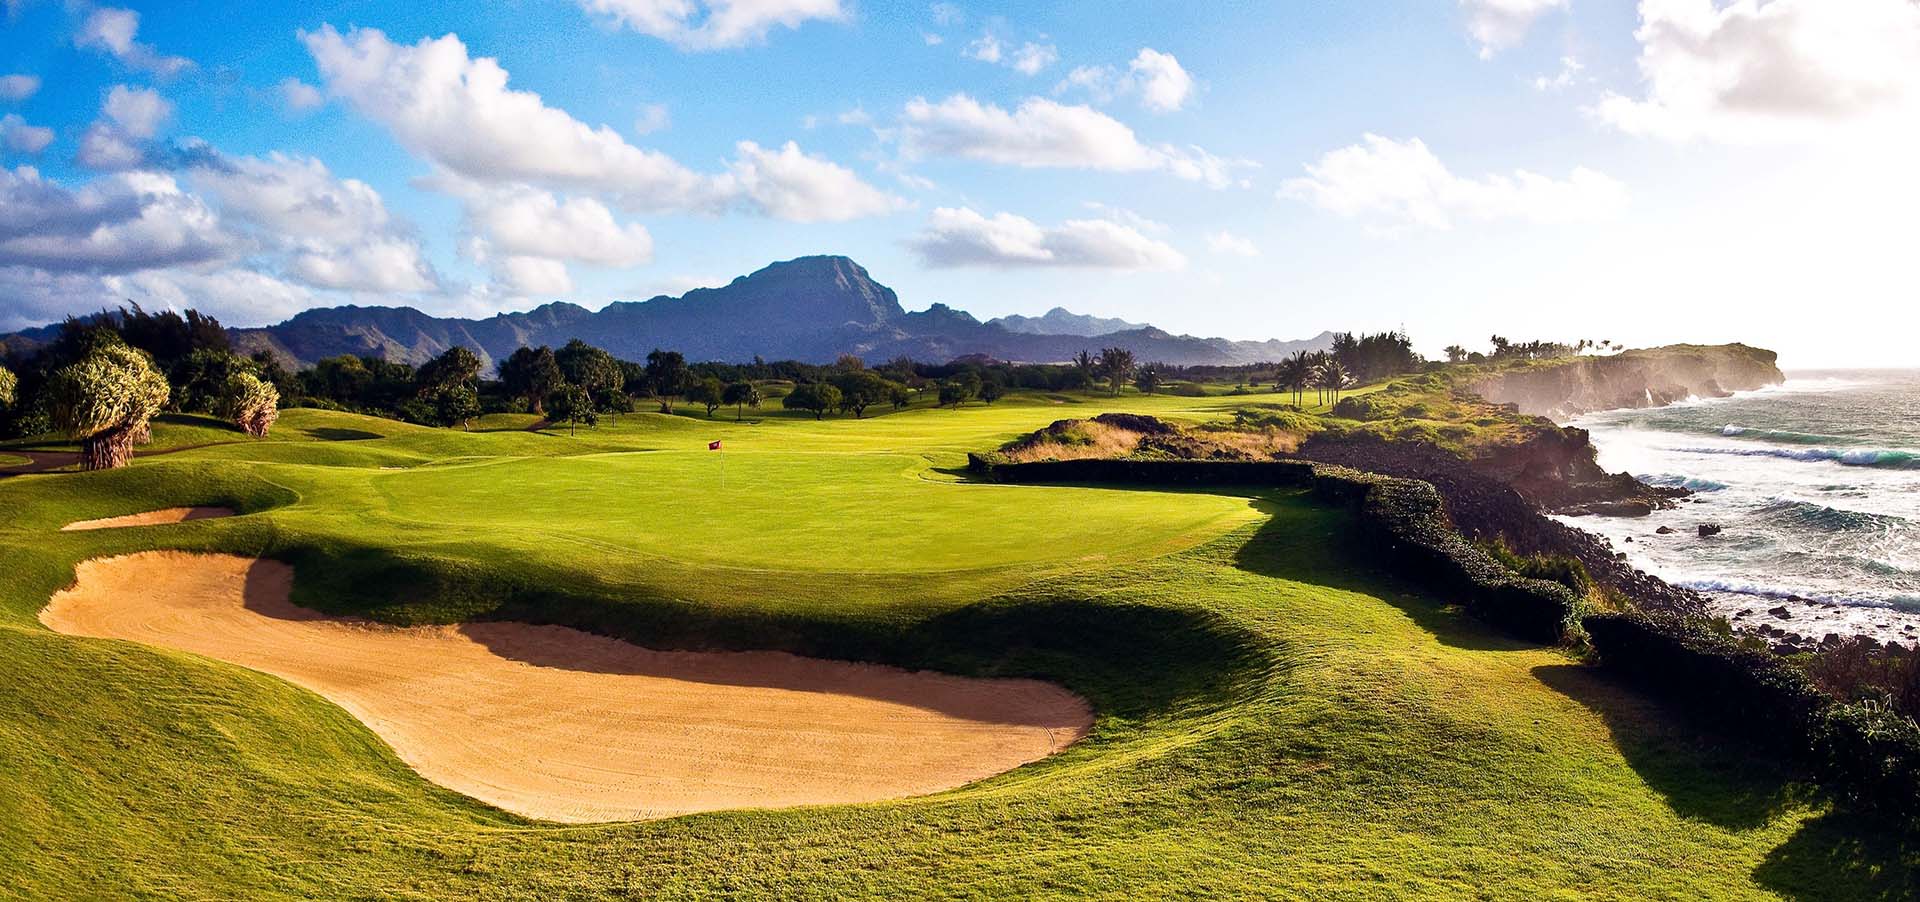 picture of a golf hole on the Poipu Bay Golf Course in Hawaii